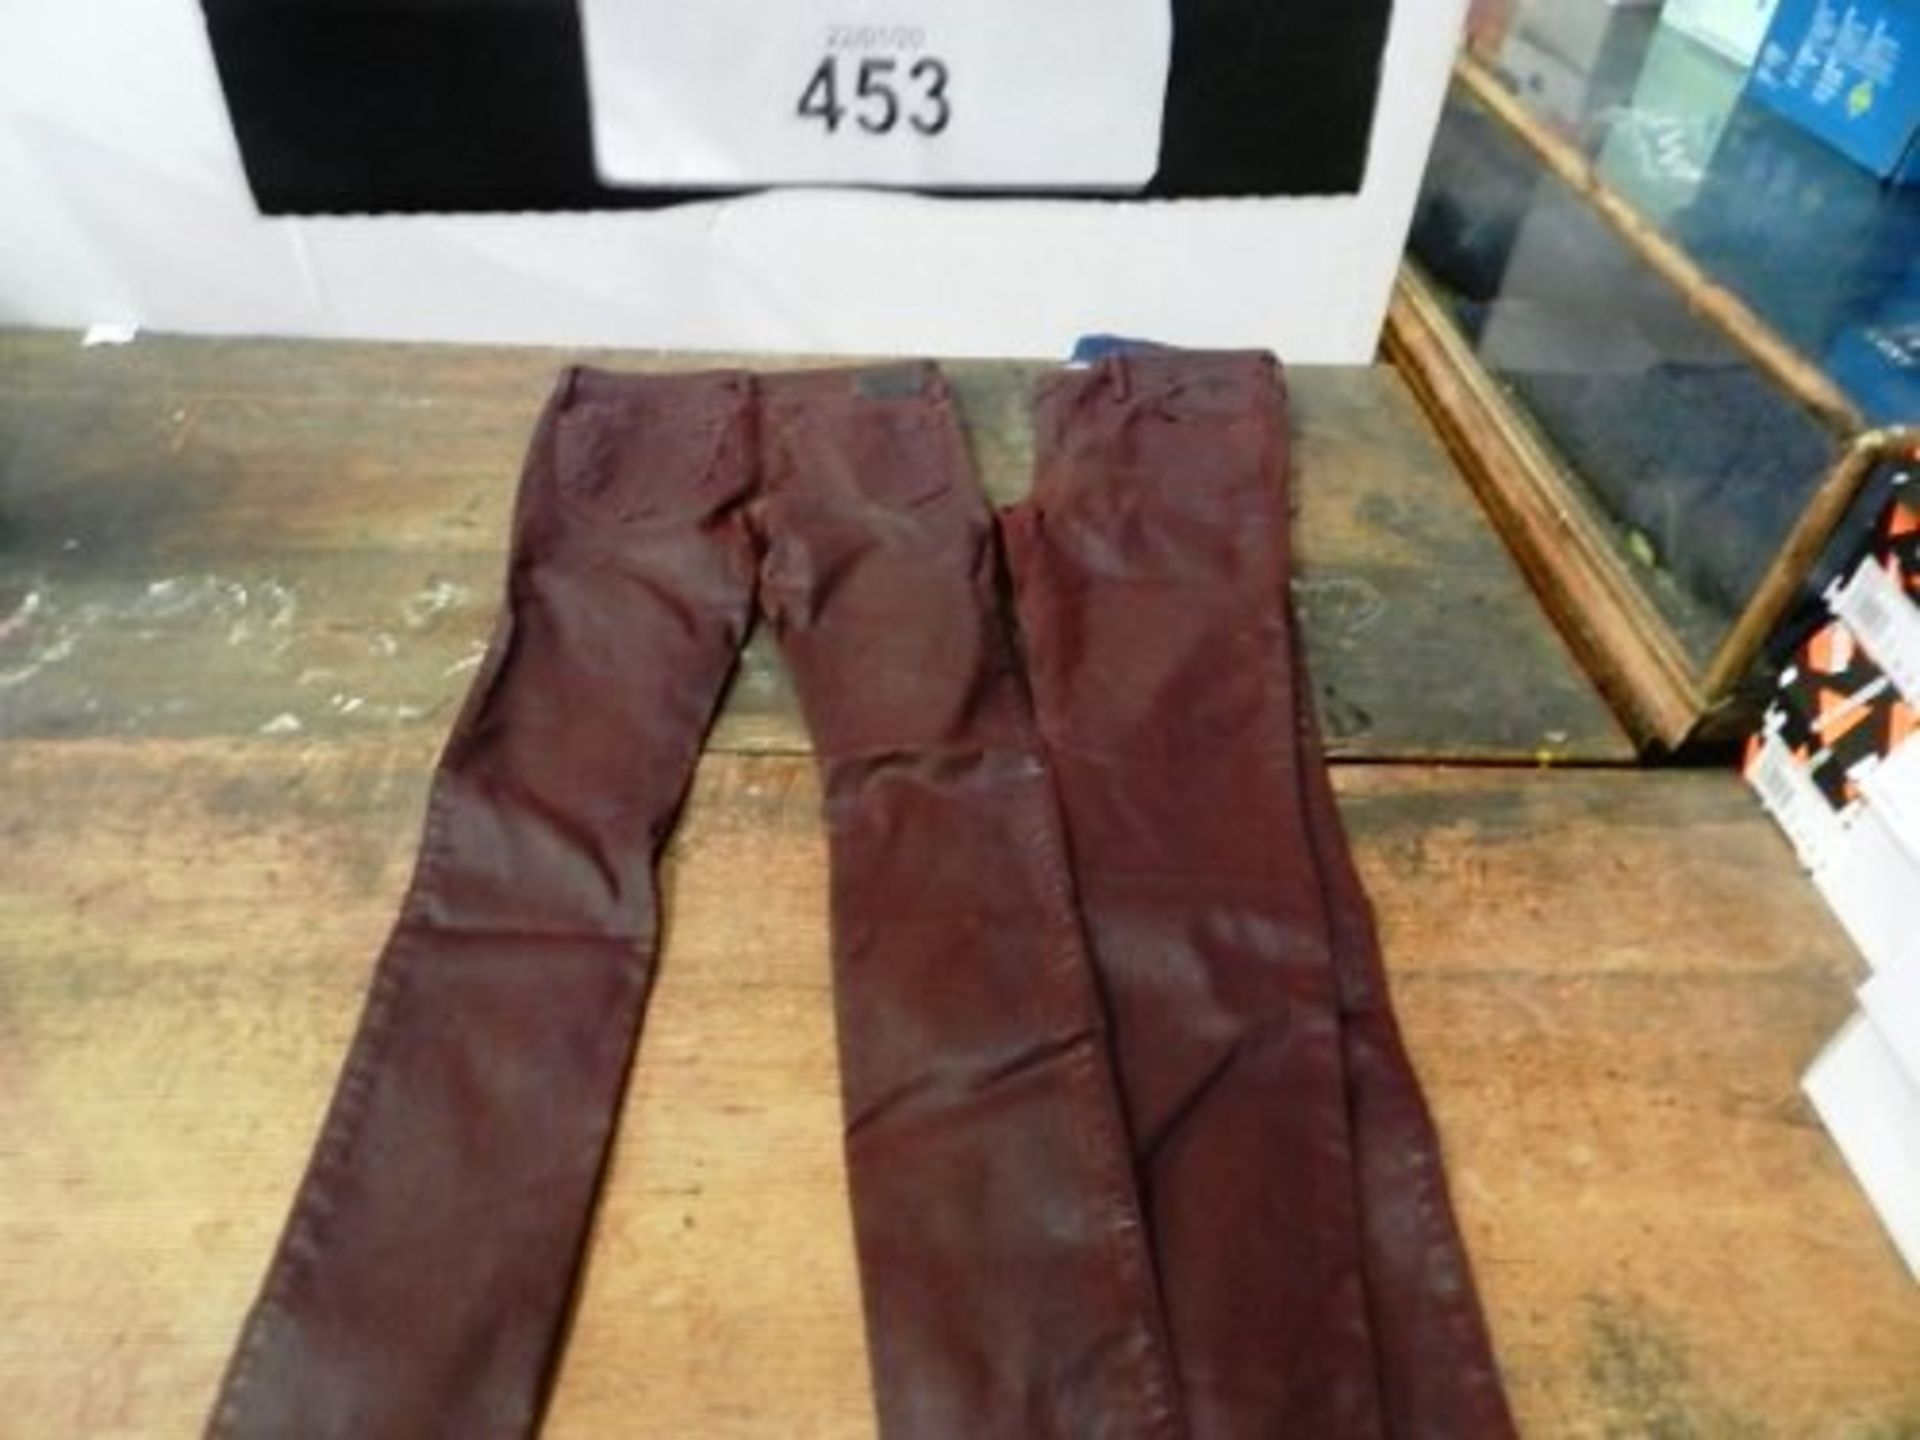 2 x Diesel Skinzee leather effect ladies trousers, size W27 x L30 and W30 x L30, RRP £190.00 -